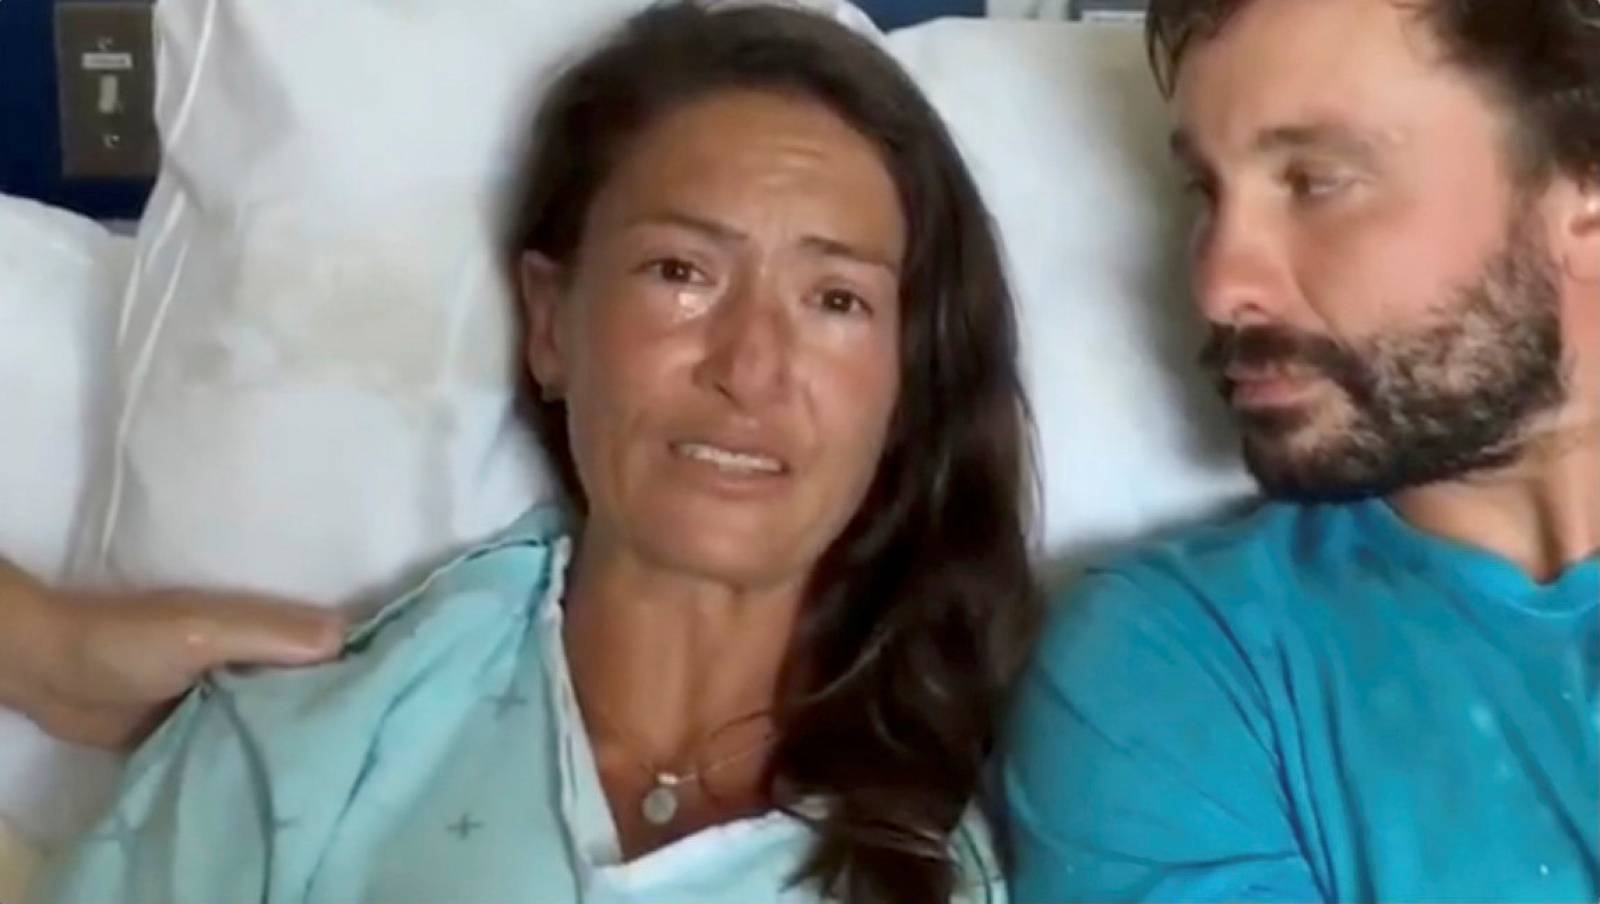 Still image from video of Amanda Eller, a yoga instructor who went missing for 17 days while hiking in Maui's Makawao Forest Reserve, speaking from her hospital bed at Maui Memorial Medical Center in Hawaii